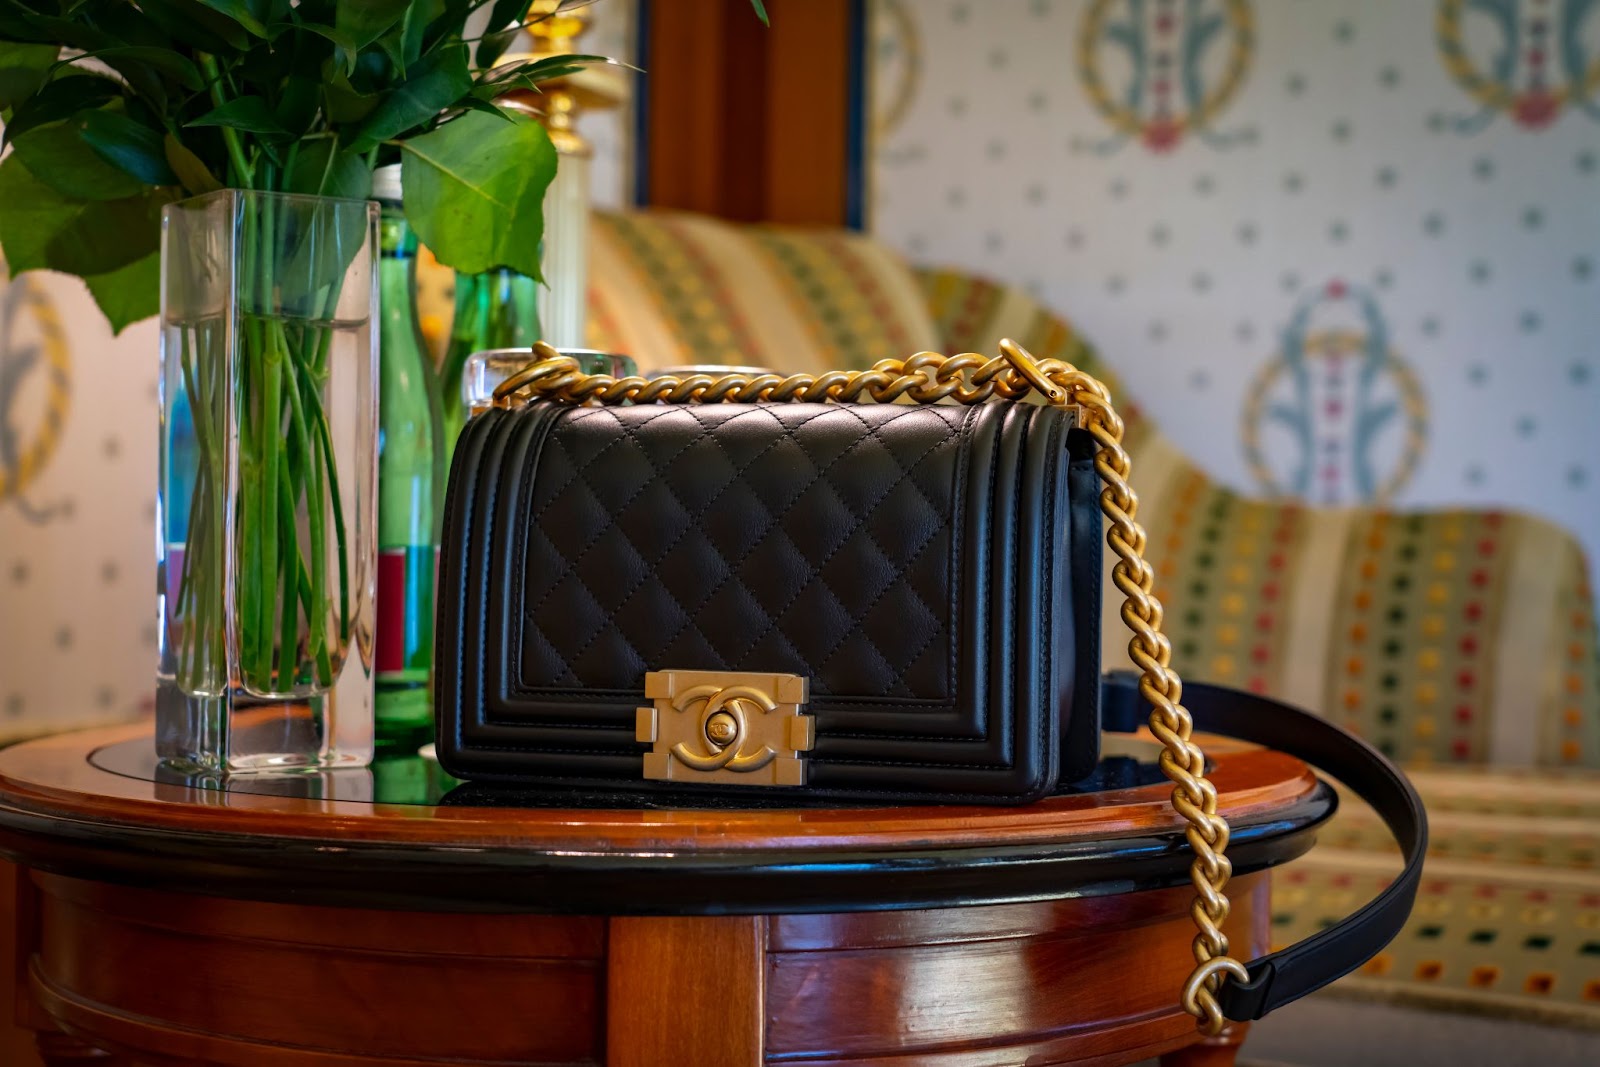 The Top 10 Vintage Bags for Your Next Luxury Investment